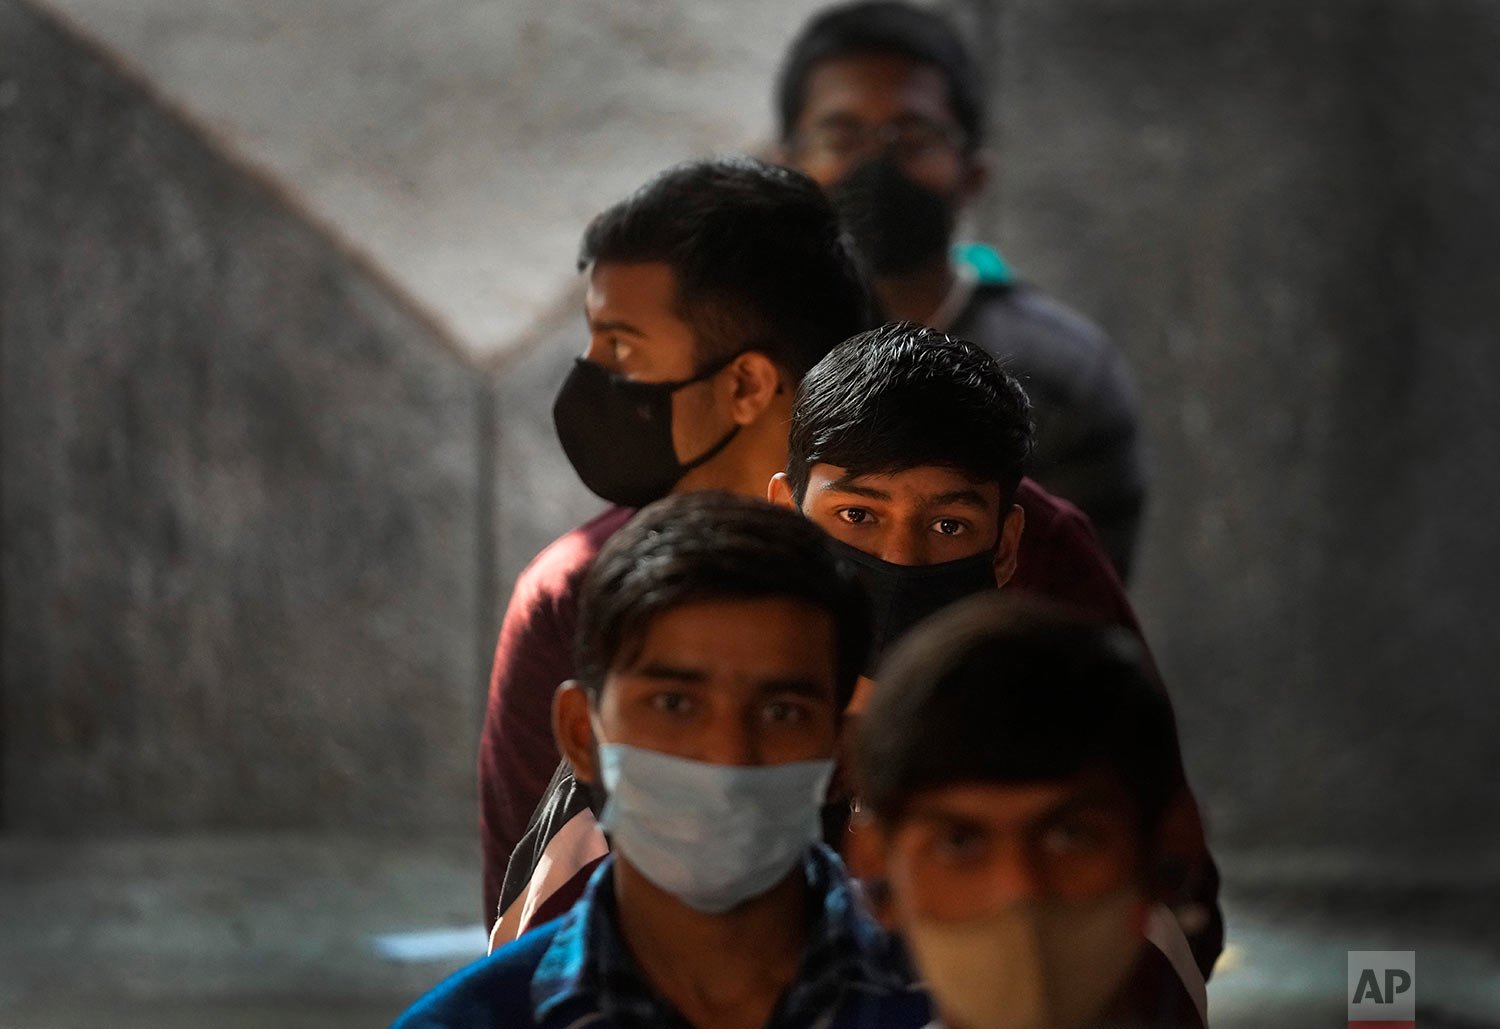  Children wait to receive their COVID-19 vaccines at a government school in New Delhi, India, Monday, Jan. 3, 2022.  (AP Photo/Manish Swarup) 